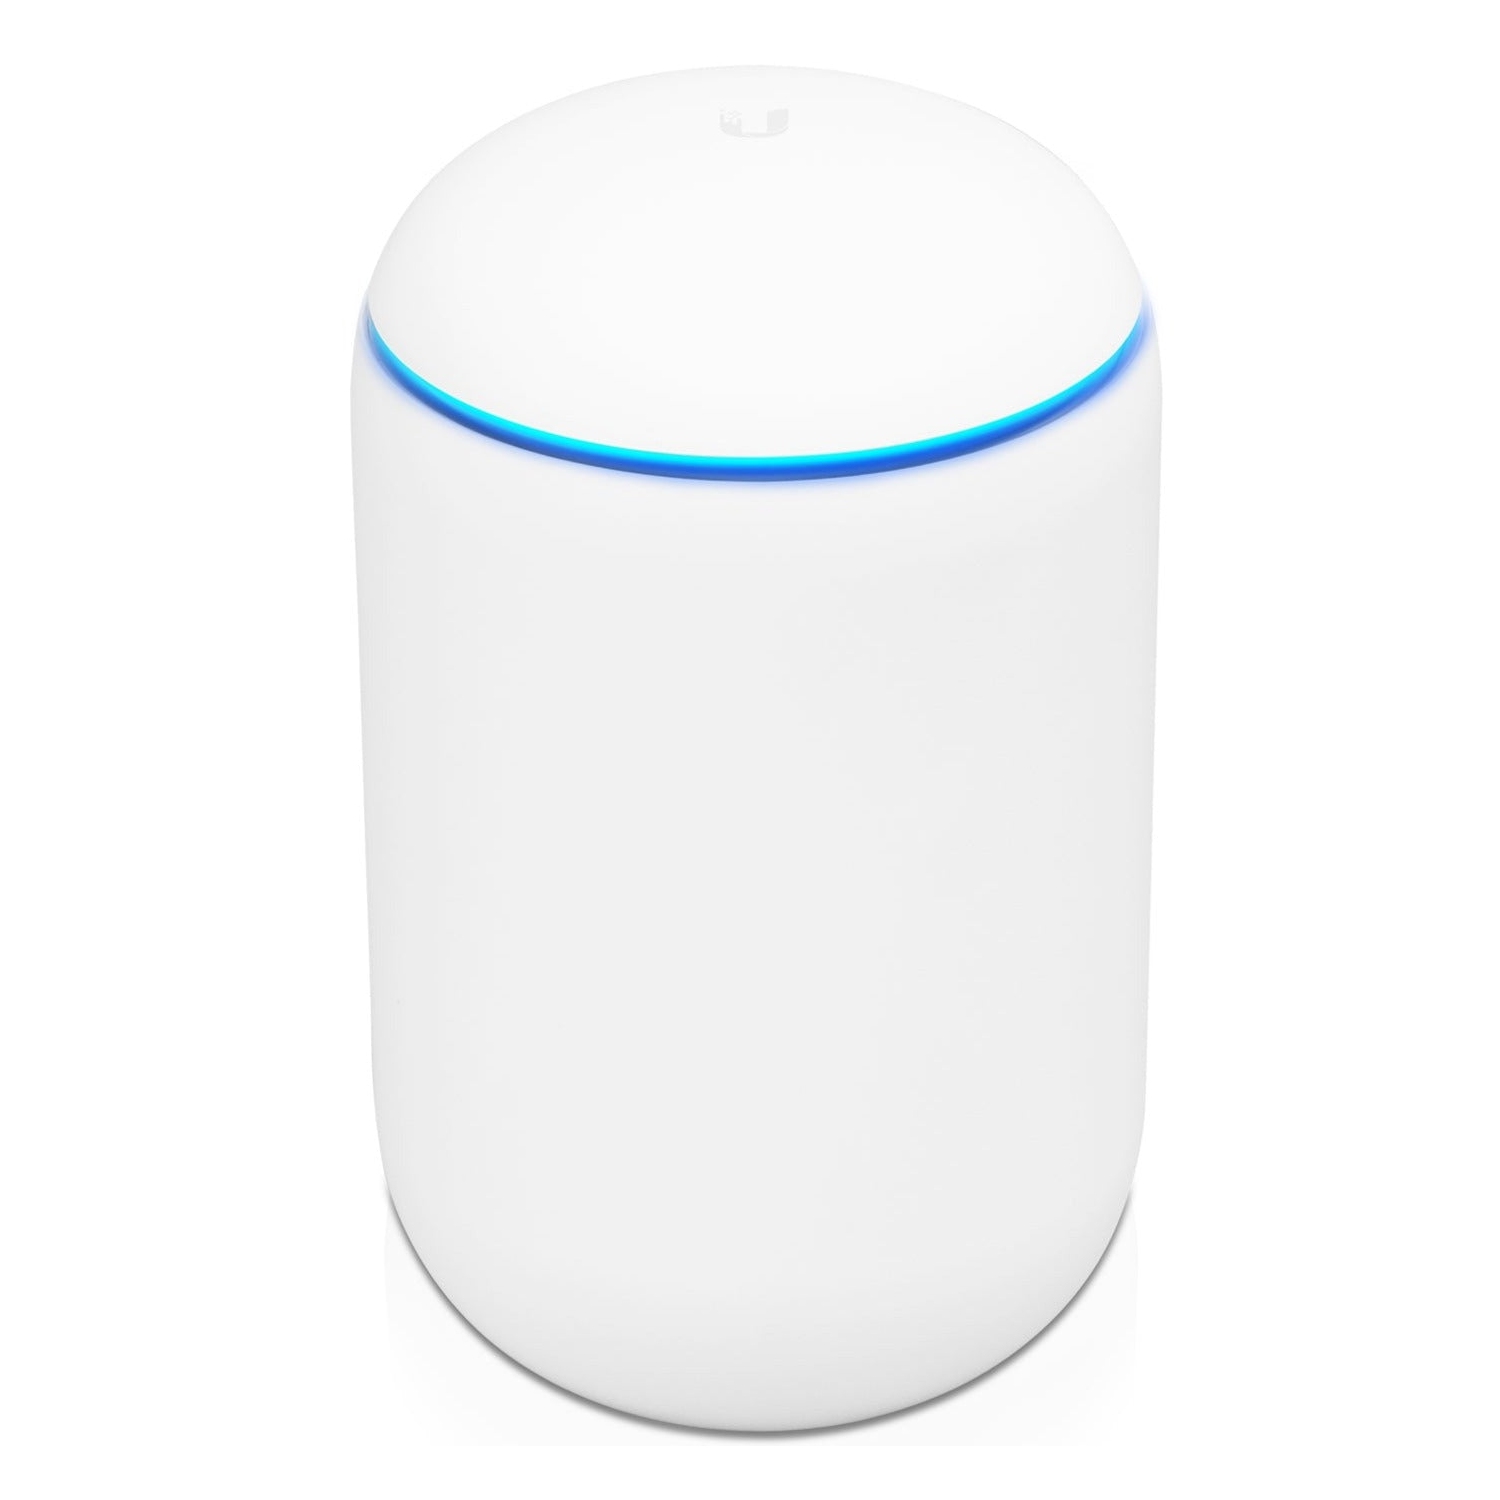 Ubiquiti Unifi Dream Machine Dual Band 802.11Ac Wave 2 4X4 Mu-Mimo Multifunction Device - Router/Access Point/Switch/Security Gateway with Integrated Cloud Key - Us Model - White